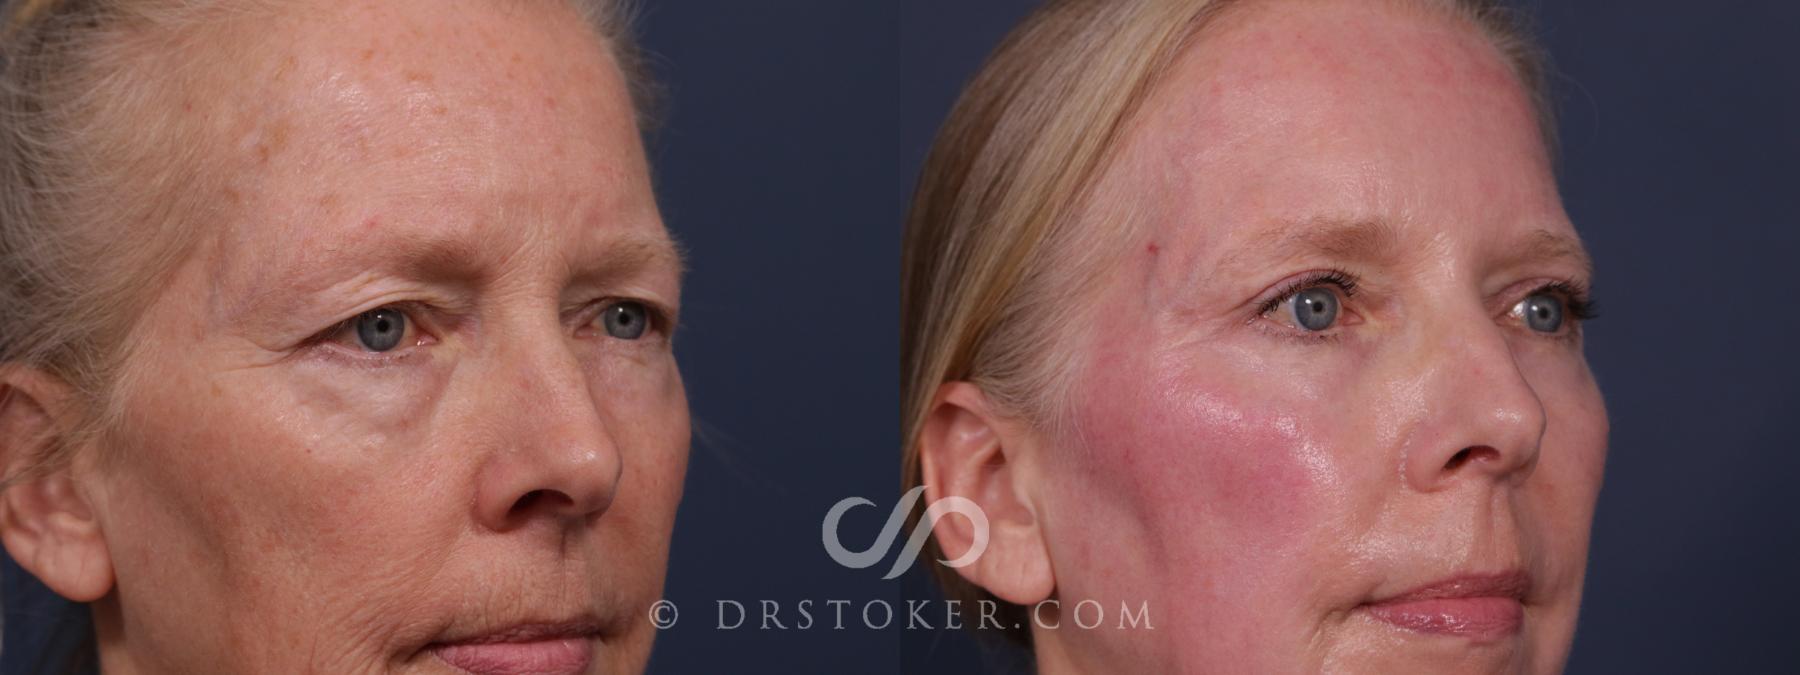 Before & After Laser Skin Resurfacing  Case 2190 Right Oblique View in Los Angeles, CA